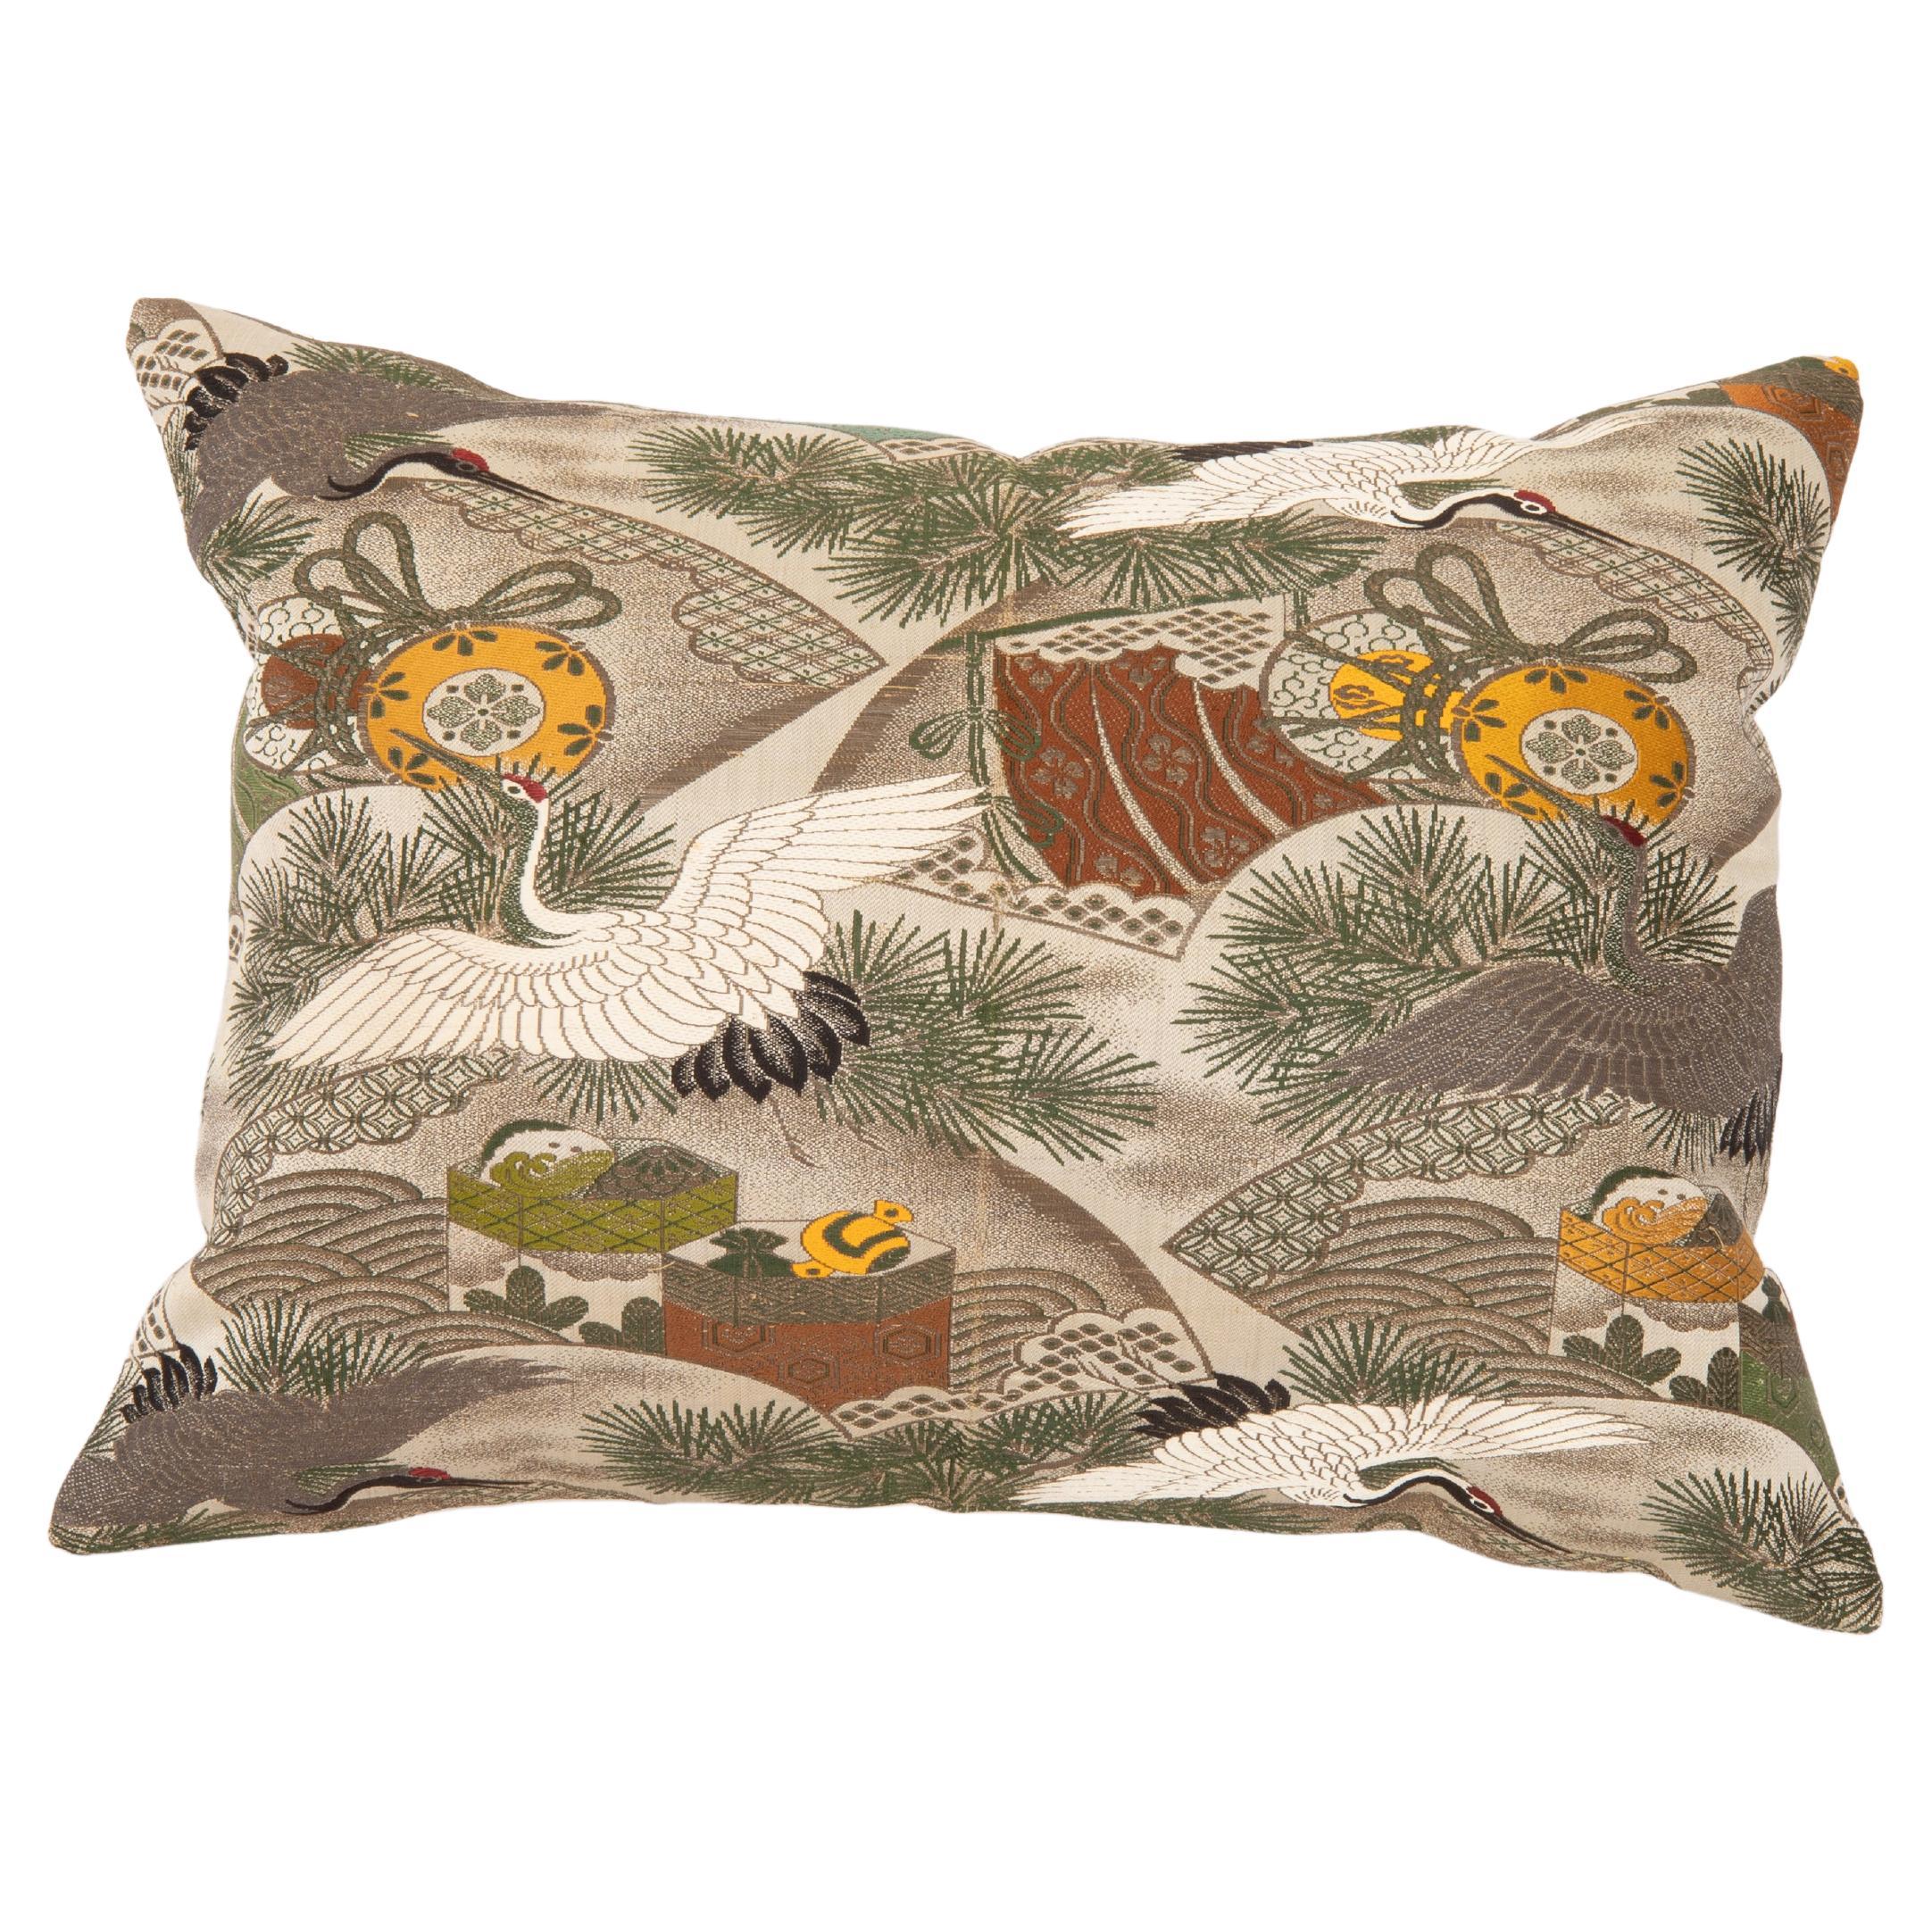 Pillow Cover Made from a Vintage Obi, Japan For Sale